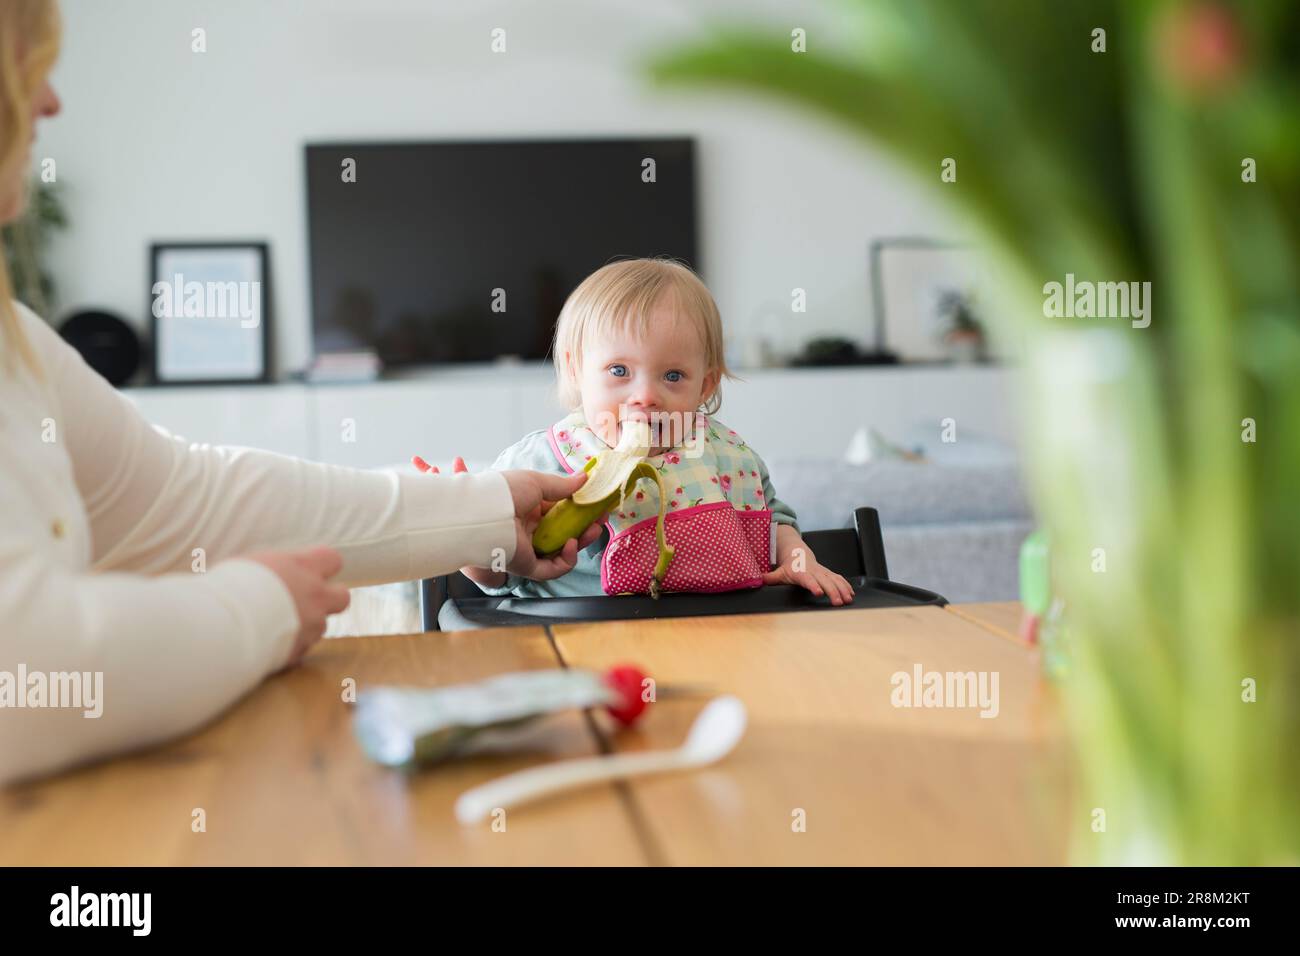 Toddler with down syndrome sitting at table Stock Photo